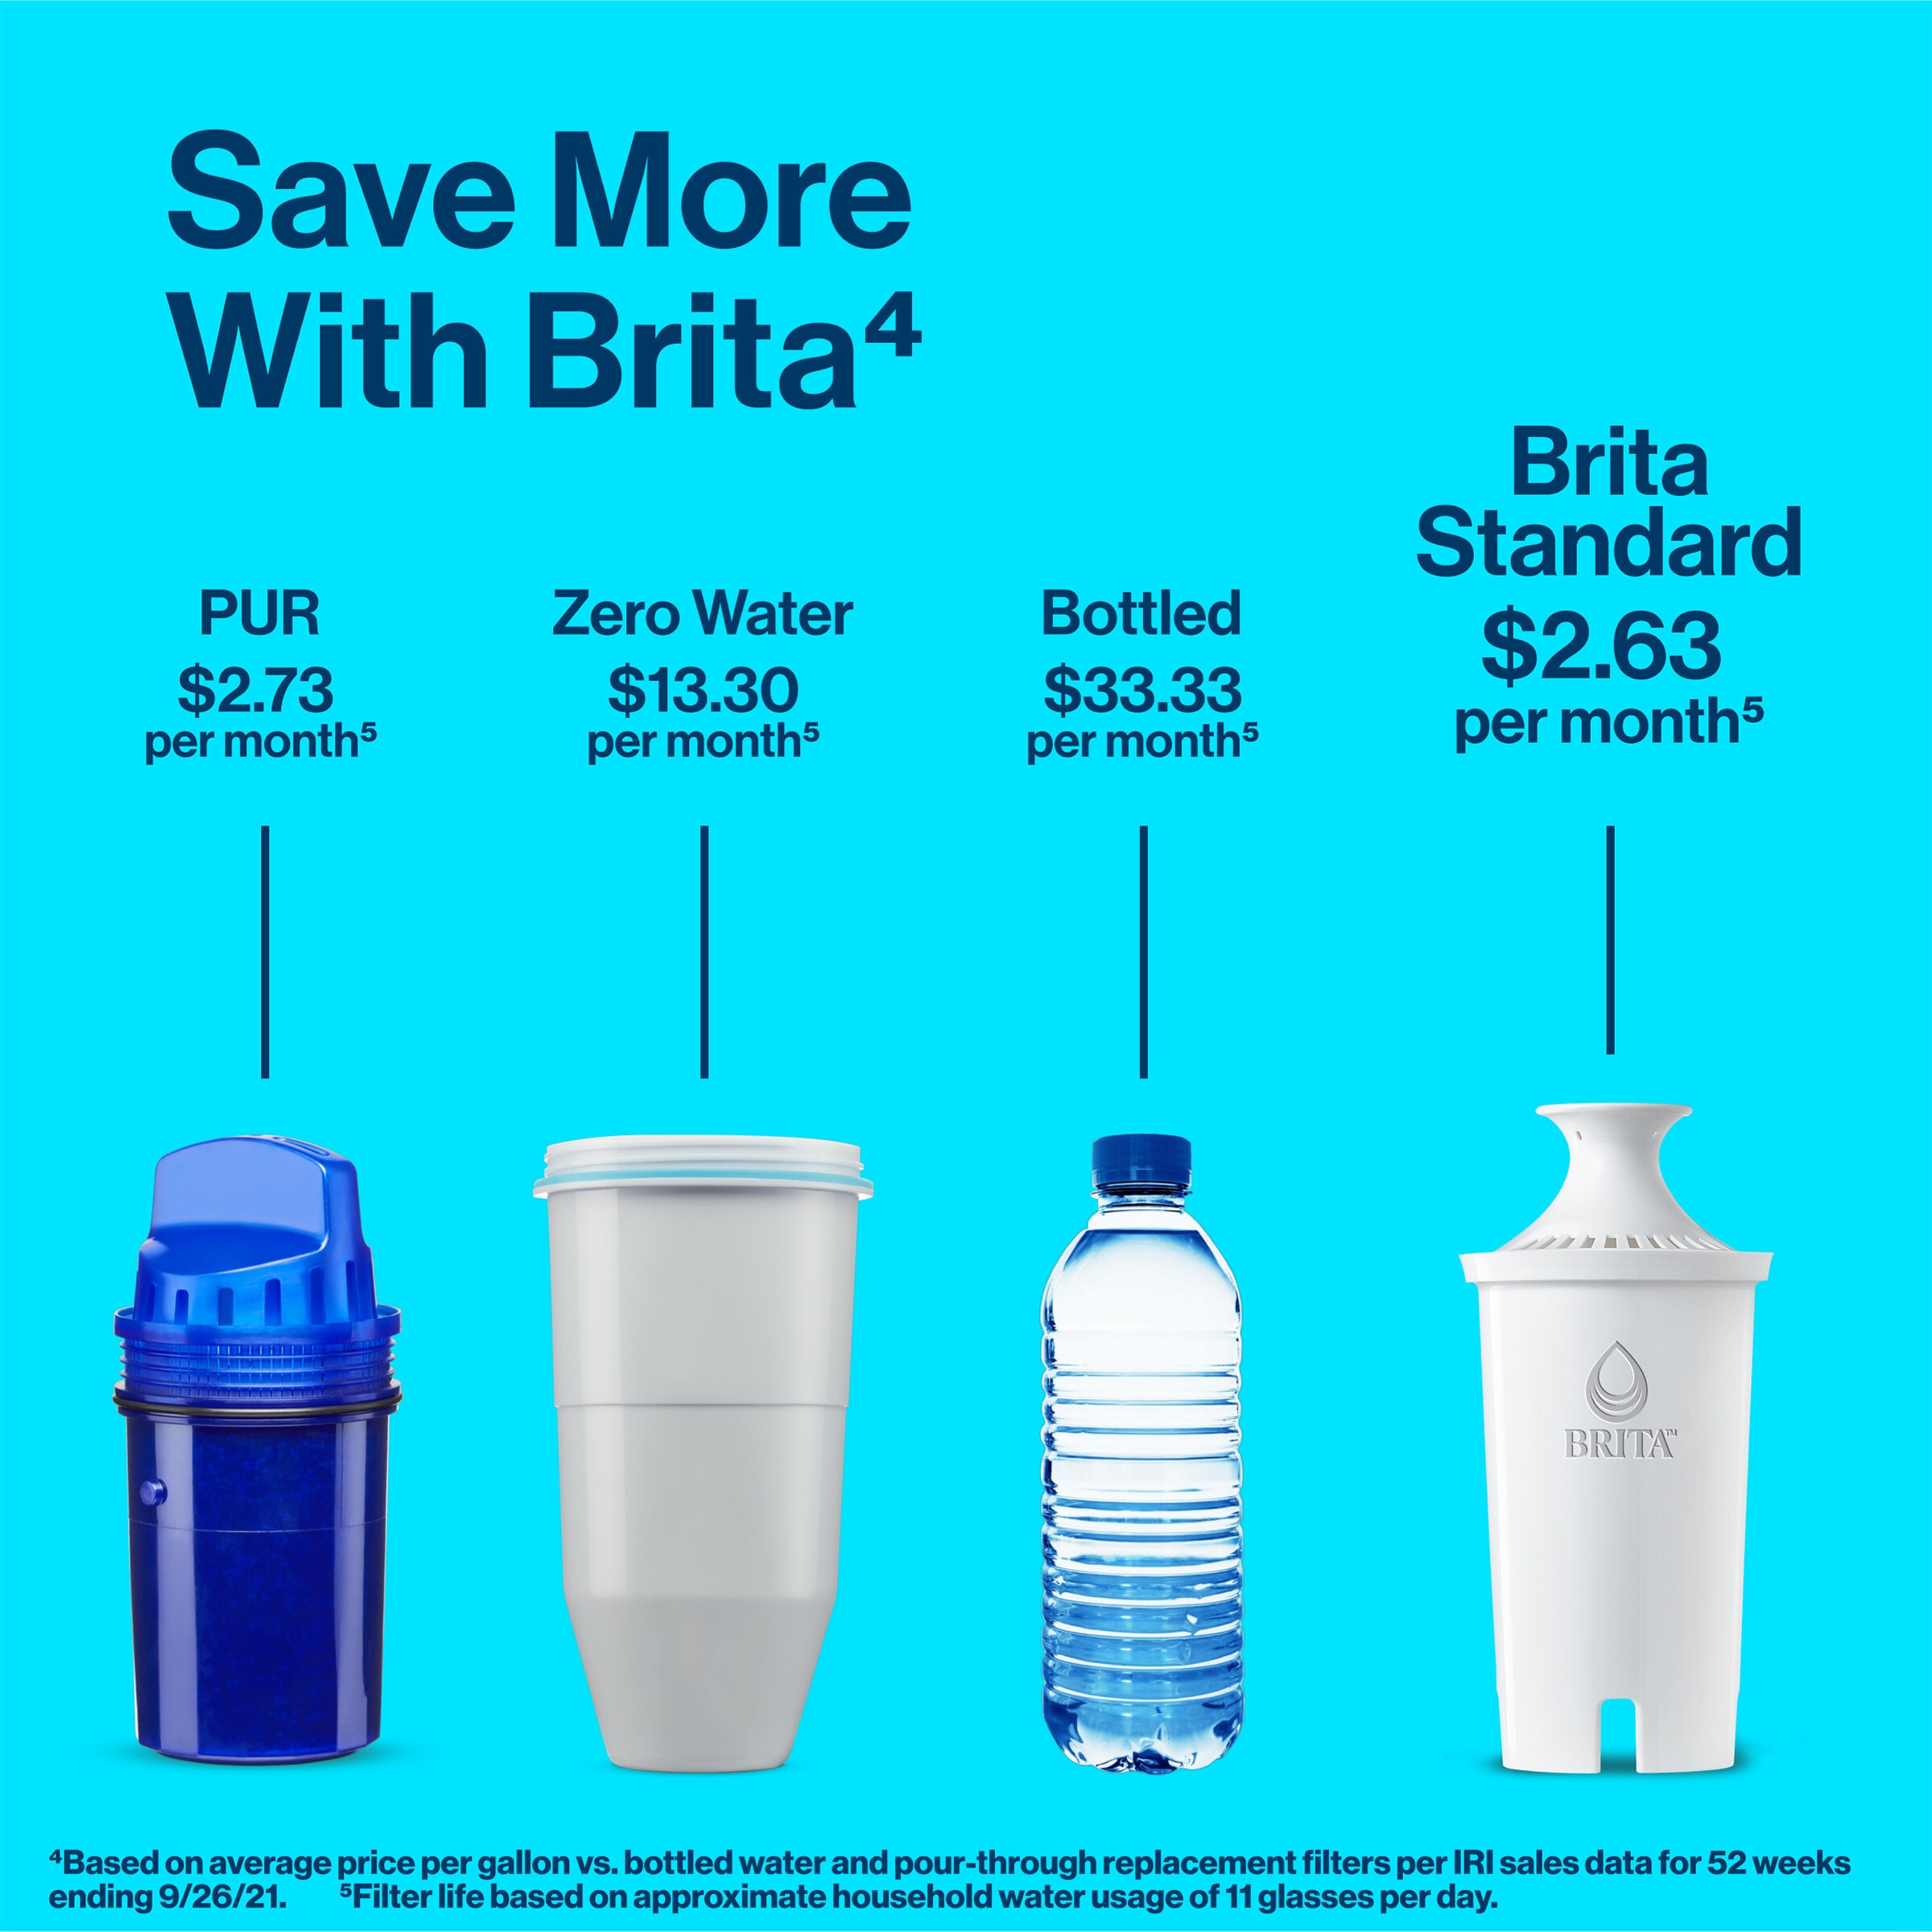 Brita Small 6-Cup Space-Saver BPA-Free Water Pitcher with Filter (35566)